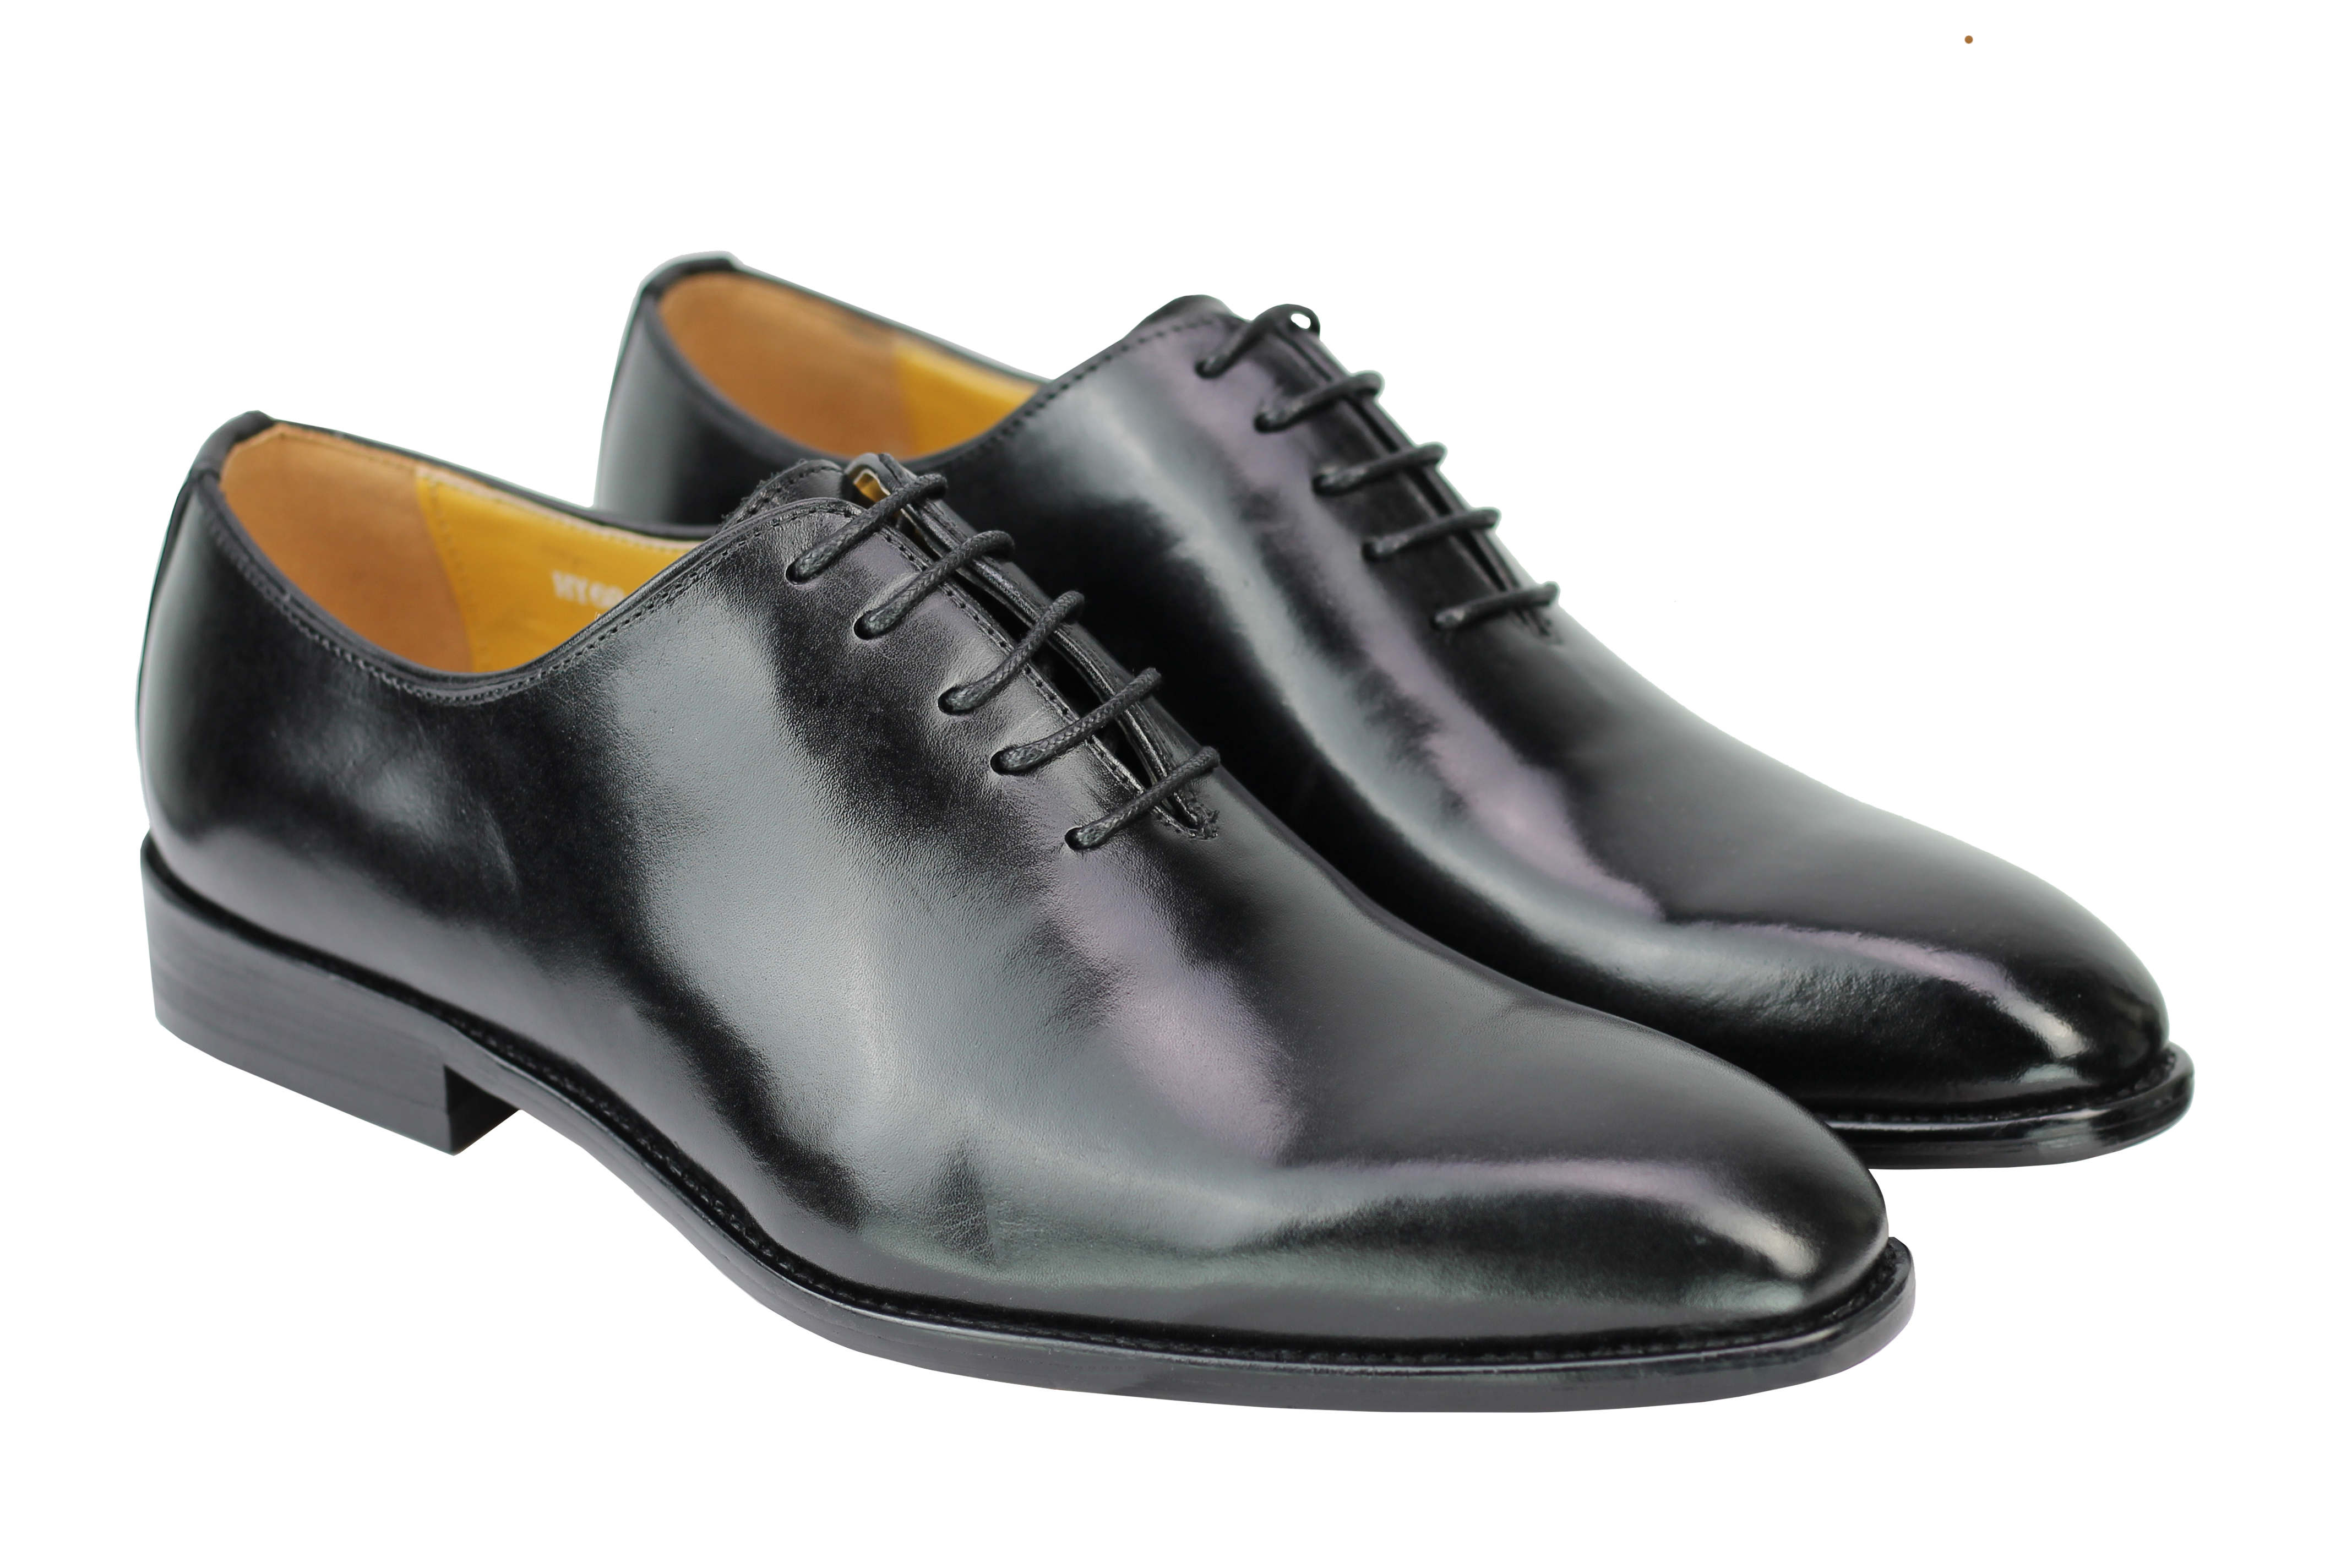 Mens Wholecut Oxford Shoes Handmade Polished Real Leather Lace up in ...